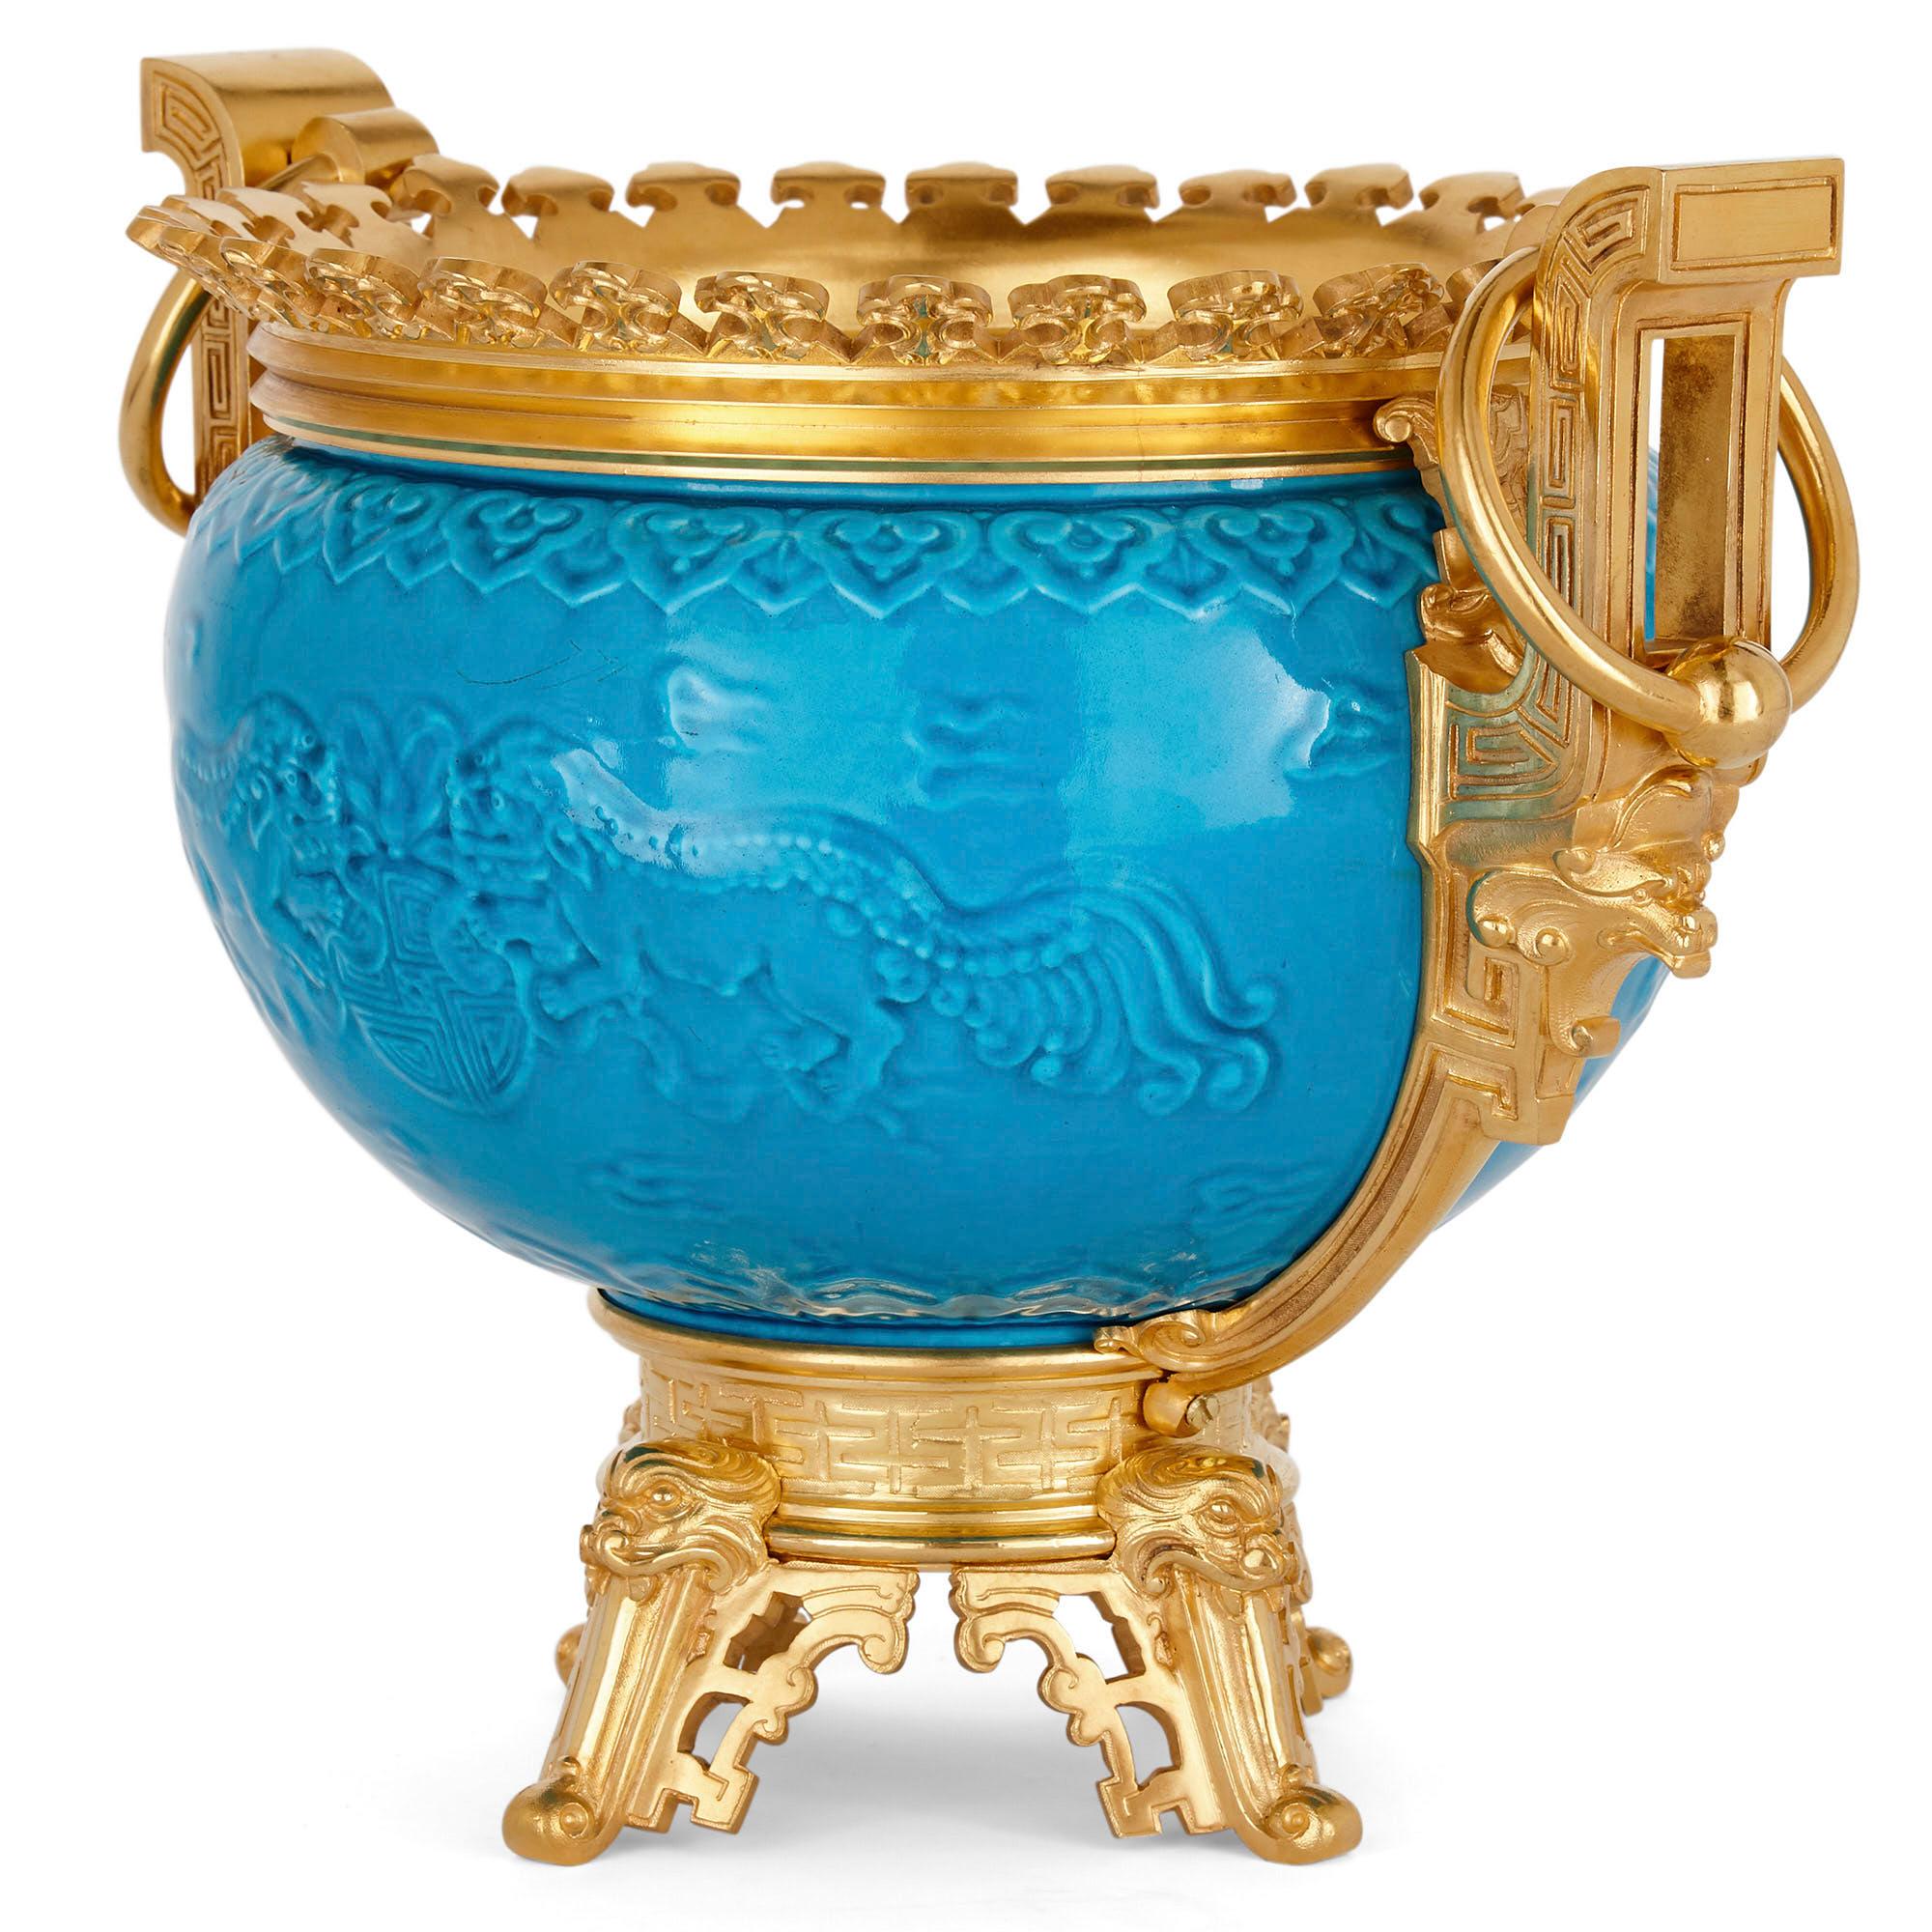 French chinoiserie style gilt bronze and faience jardinière
French, late 19th century
Measures: Height 28cm, width 37cm, depth 27cm

This stunning jardinière is wrought in the distinctive French chinoiserie manner, the ‘Persian blue’ faience